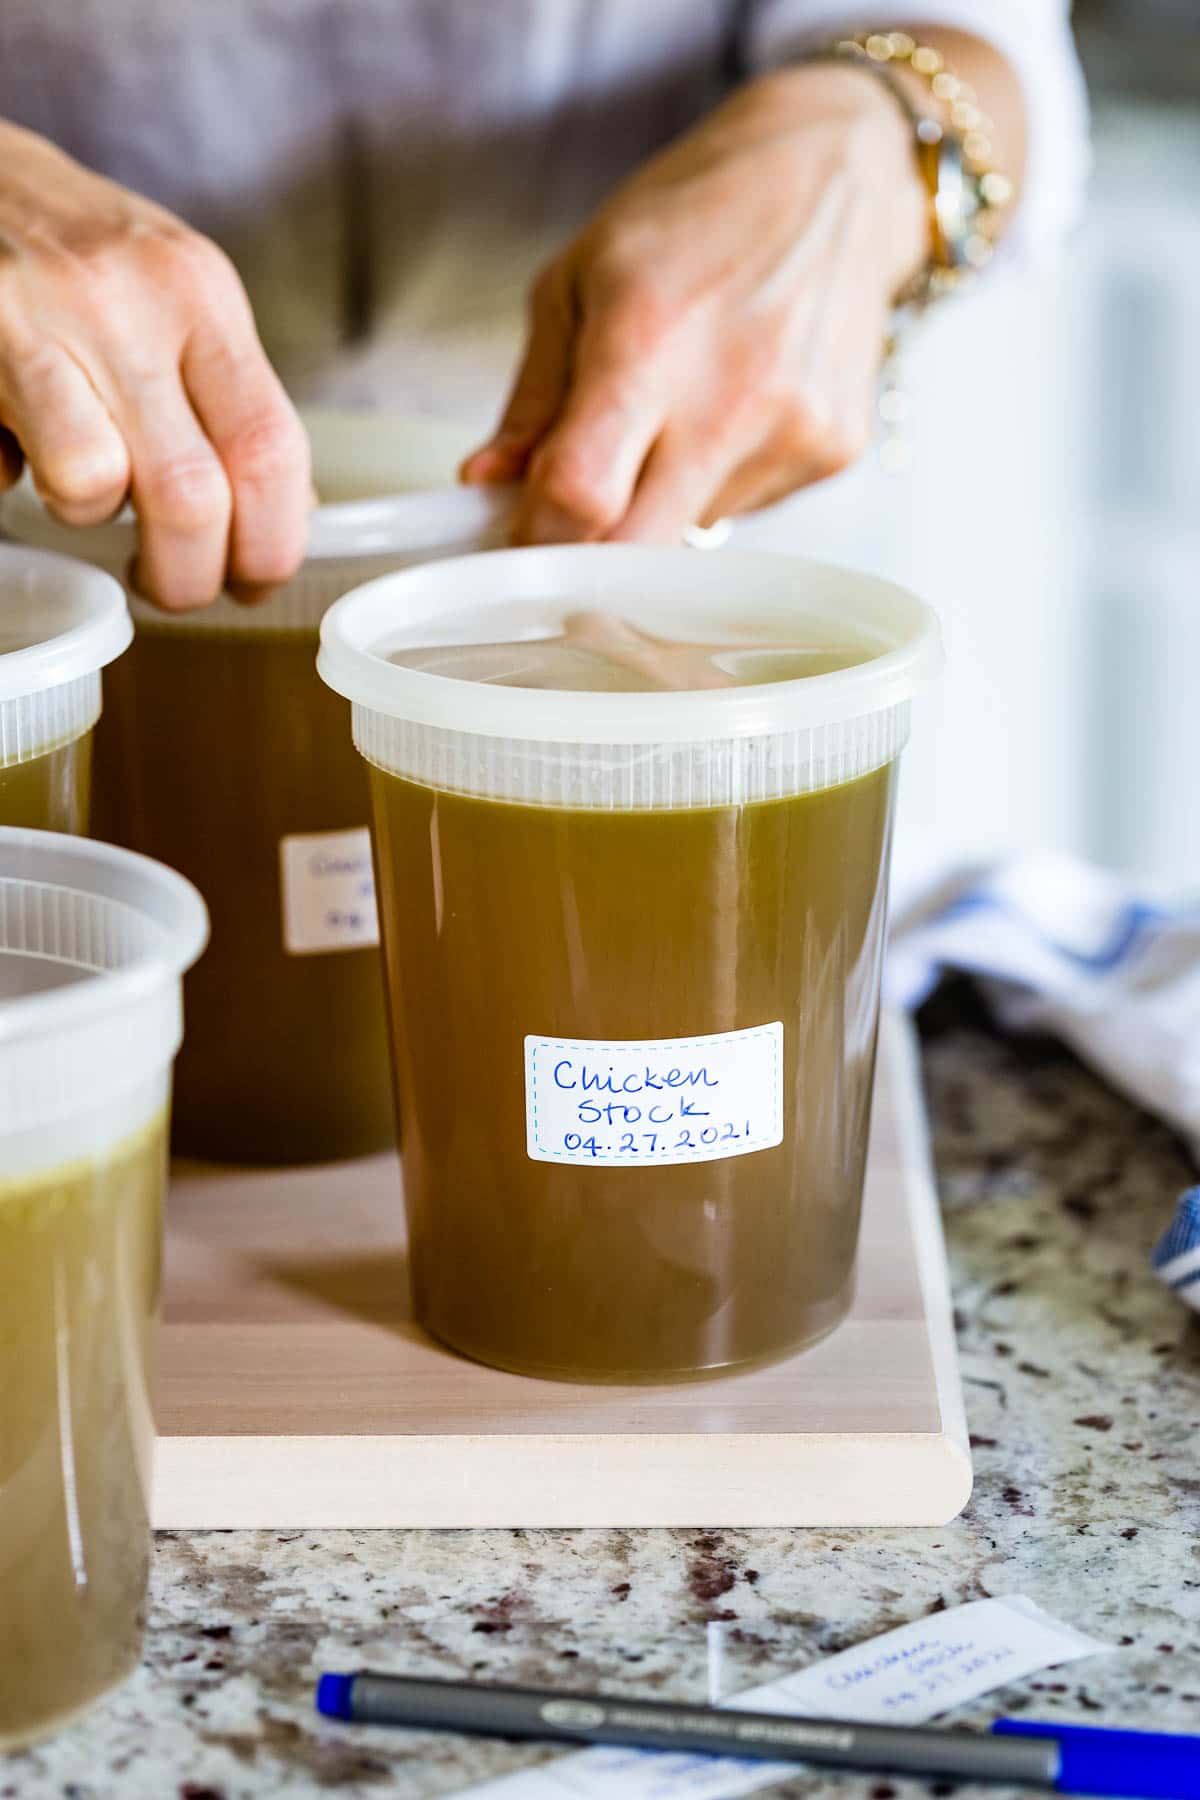 Chicken stock in a plastic container at the front with a person in the background